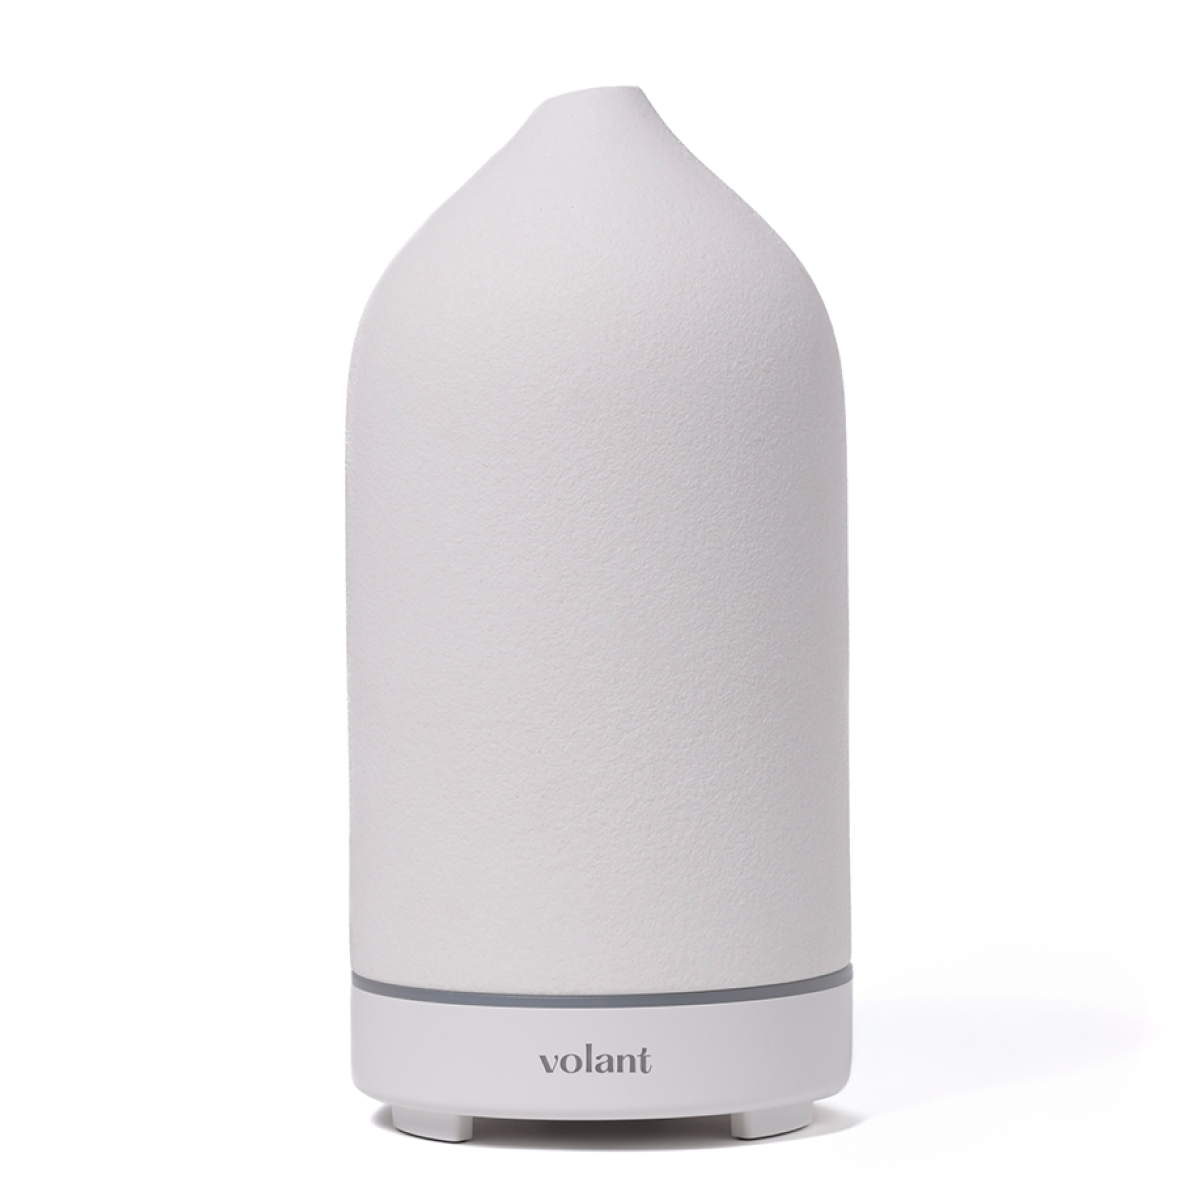 This $17 oil diffuser and humidifier freshens up my home